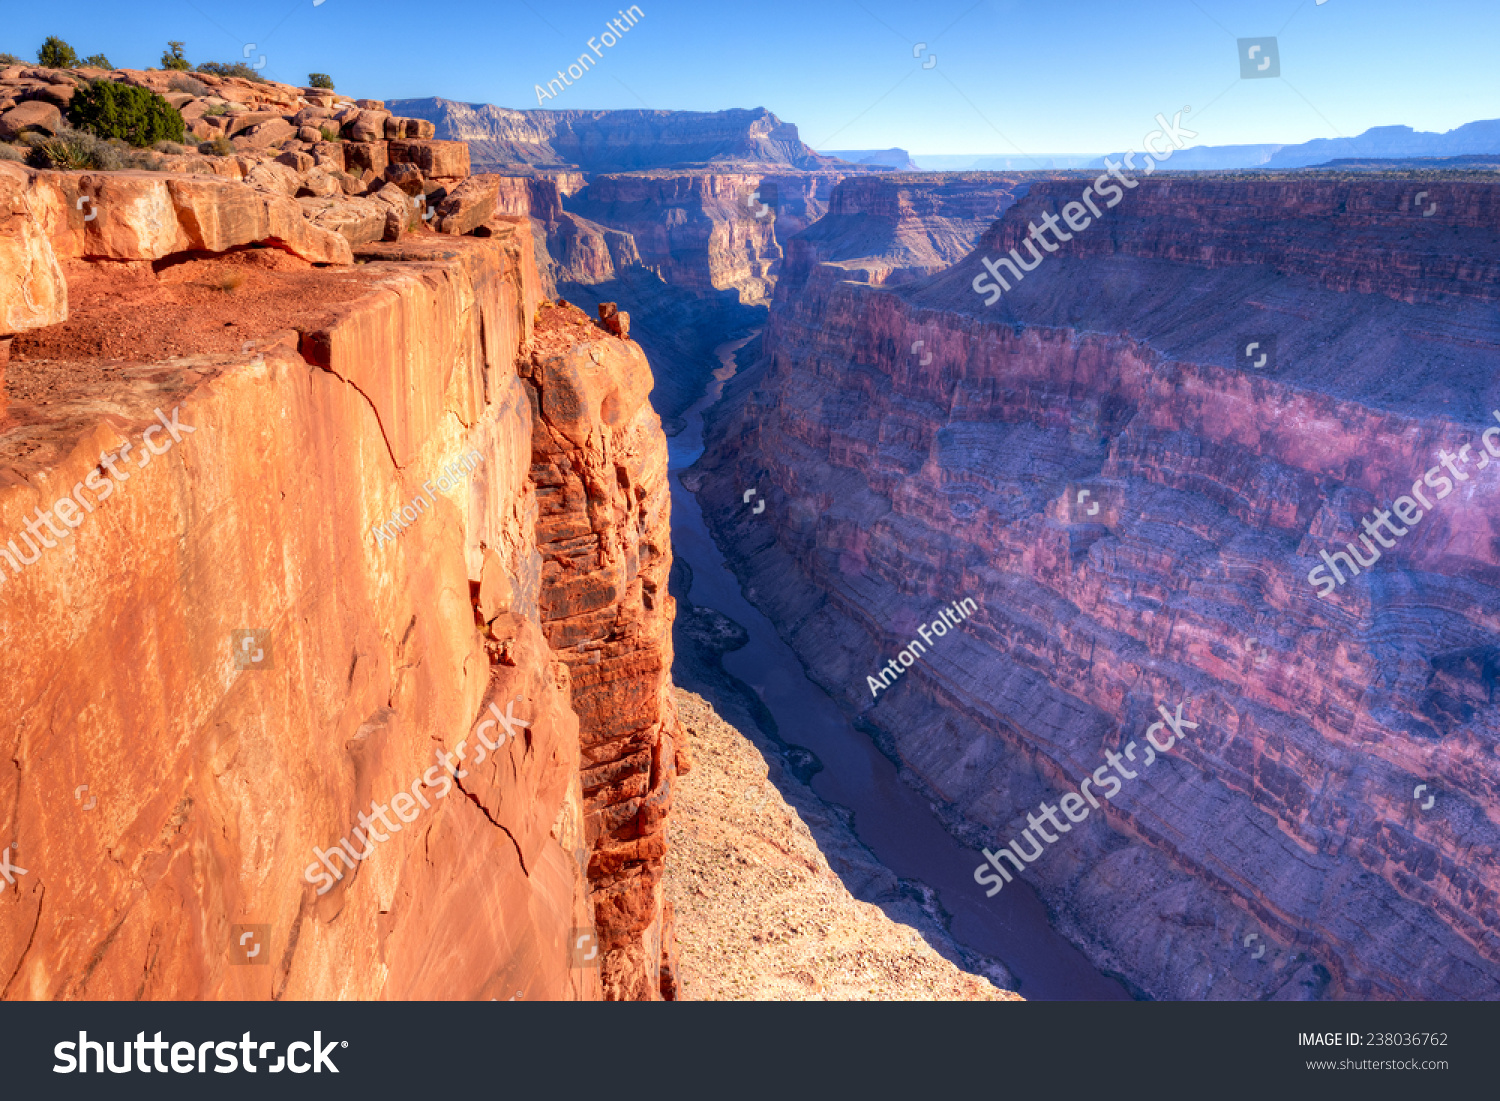 Sunrise at Toroweap Point, in Grand Canyon National Park, with Colorado River three quaters of a mile below. #238036762